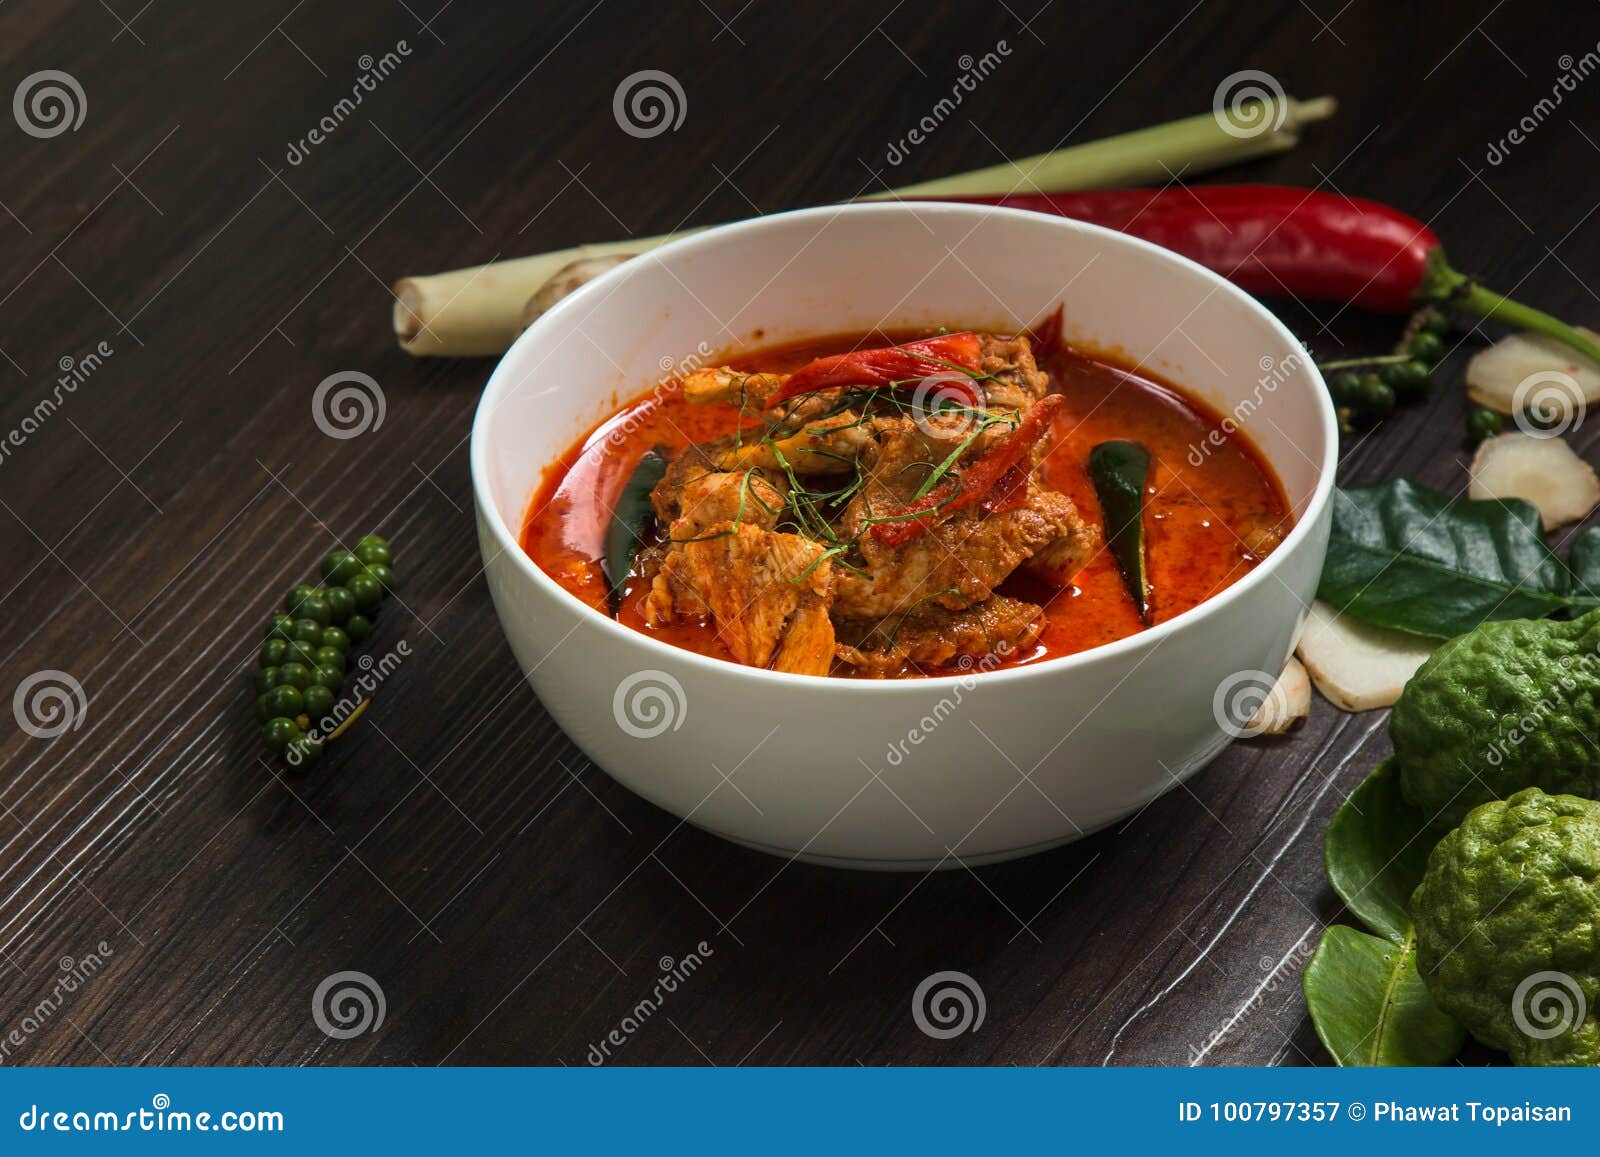 Chicken Curry with Different Spices on Dark Background Stock Image ...